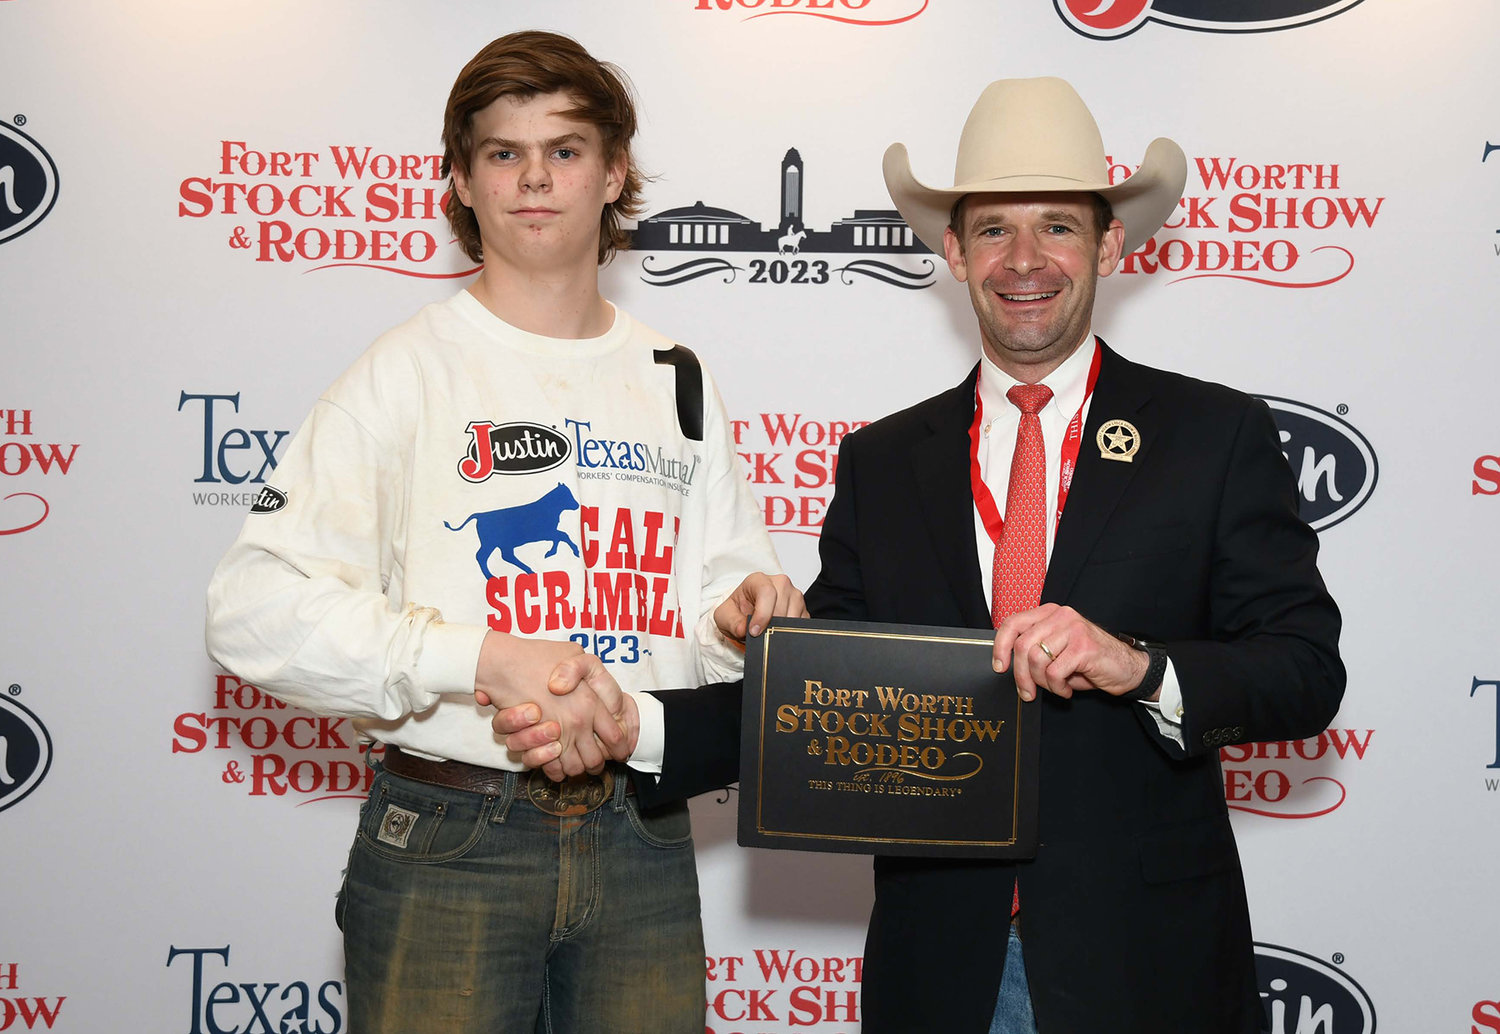 Samuel Hardwick won a $500 purchase certificate toward a beef or dairy heifer for a 4-H or FFA project for exhibition at next year’s Fort Worth Stock Show & Rodeo. The certificate, presented by Stock Show Calf Scramble Committee member, Paxton Motheral, was sponsored by River Ranch.